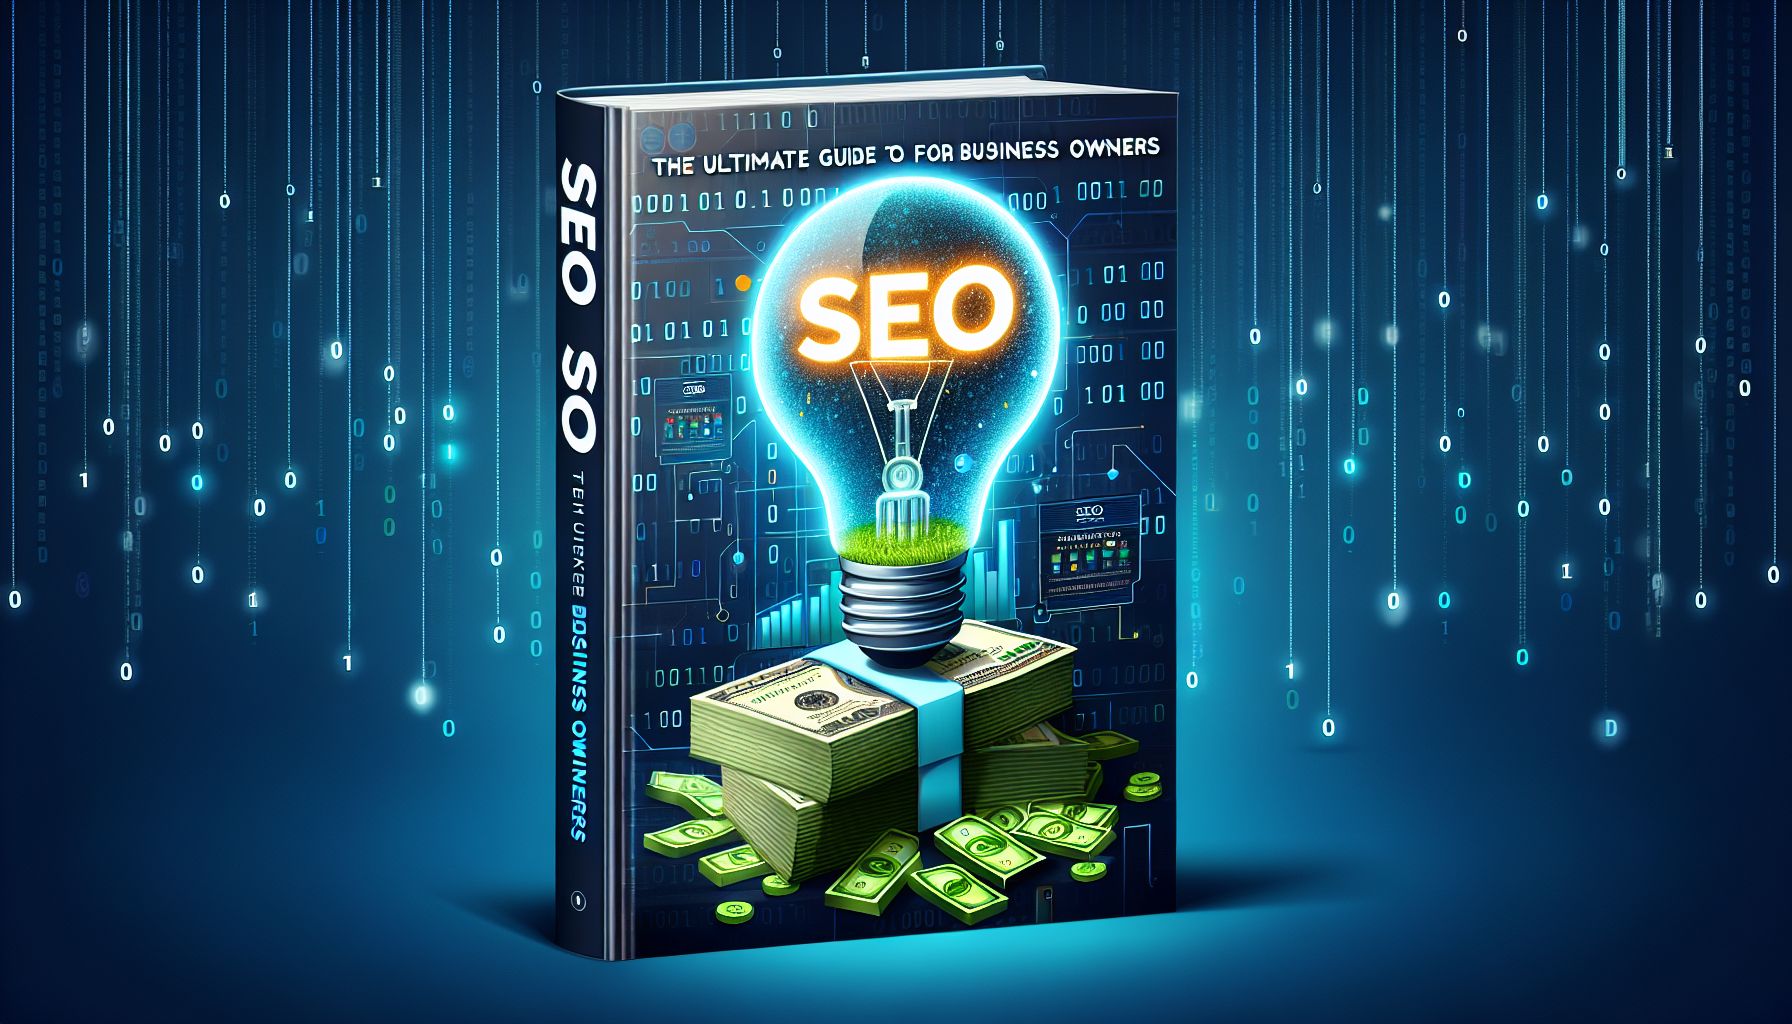 The Ultimate Guide to SEO for Business Owners